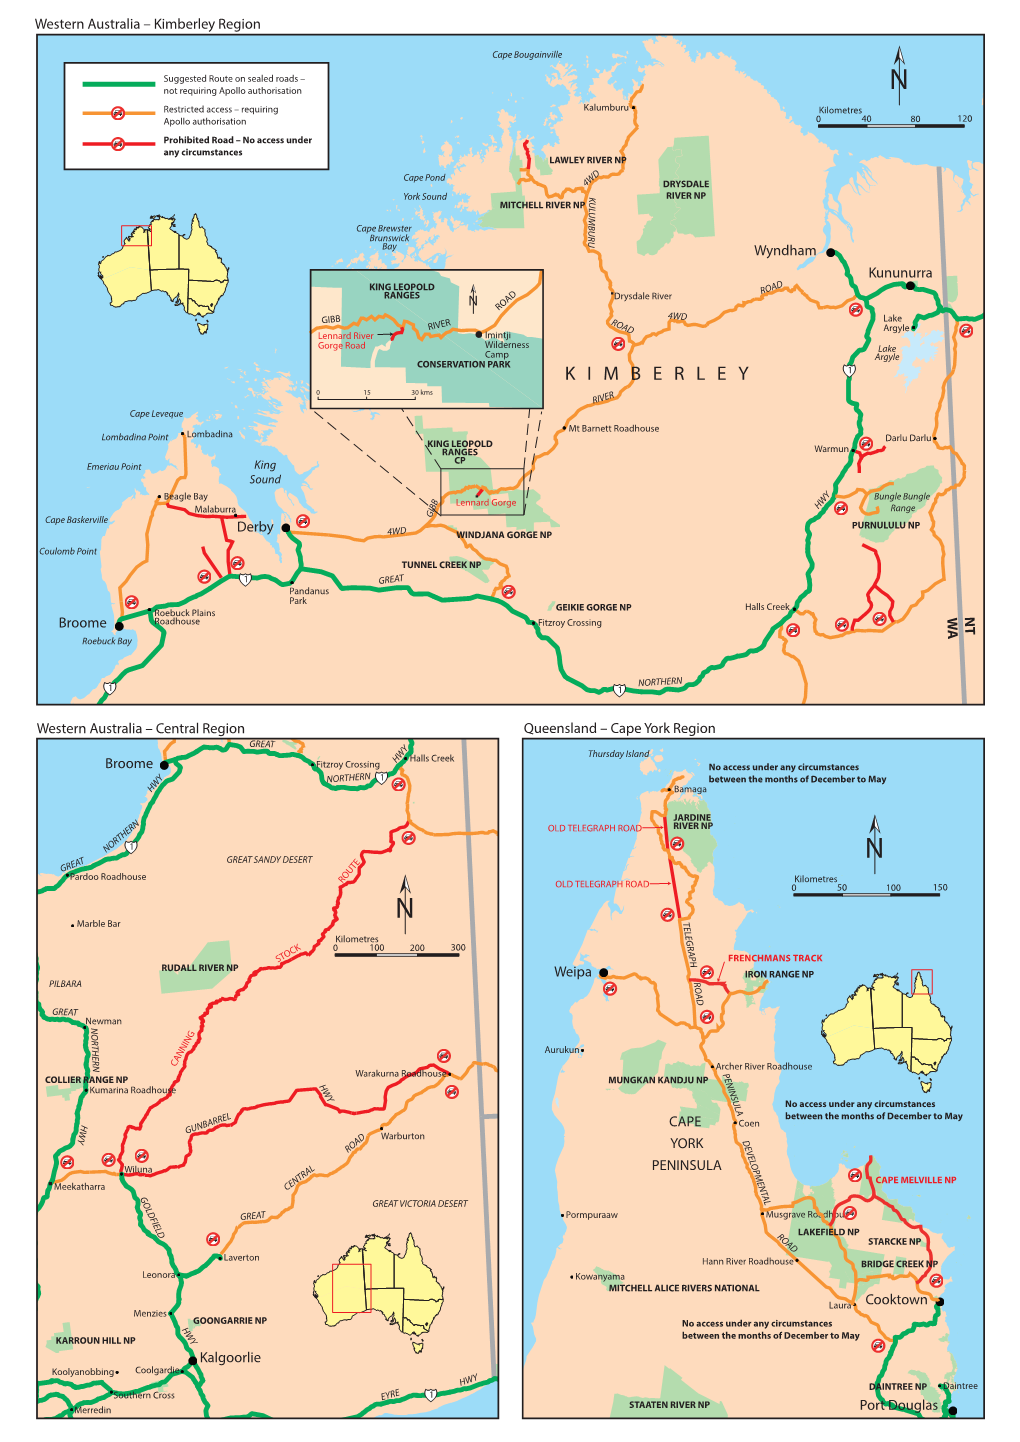 Au-Restricted4wd-Access-Map-Pg1 Copy